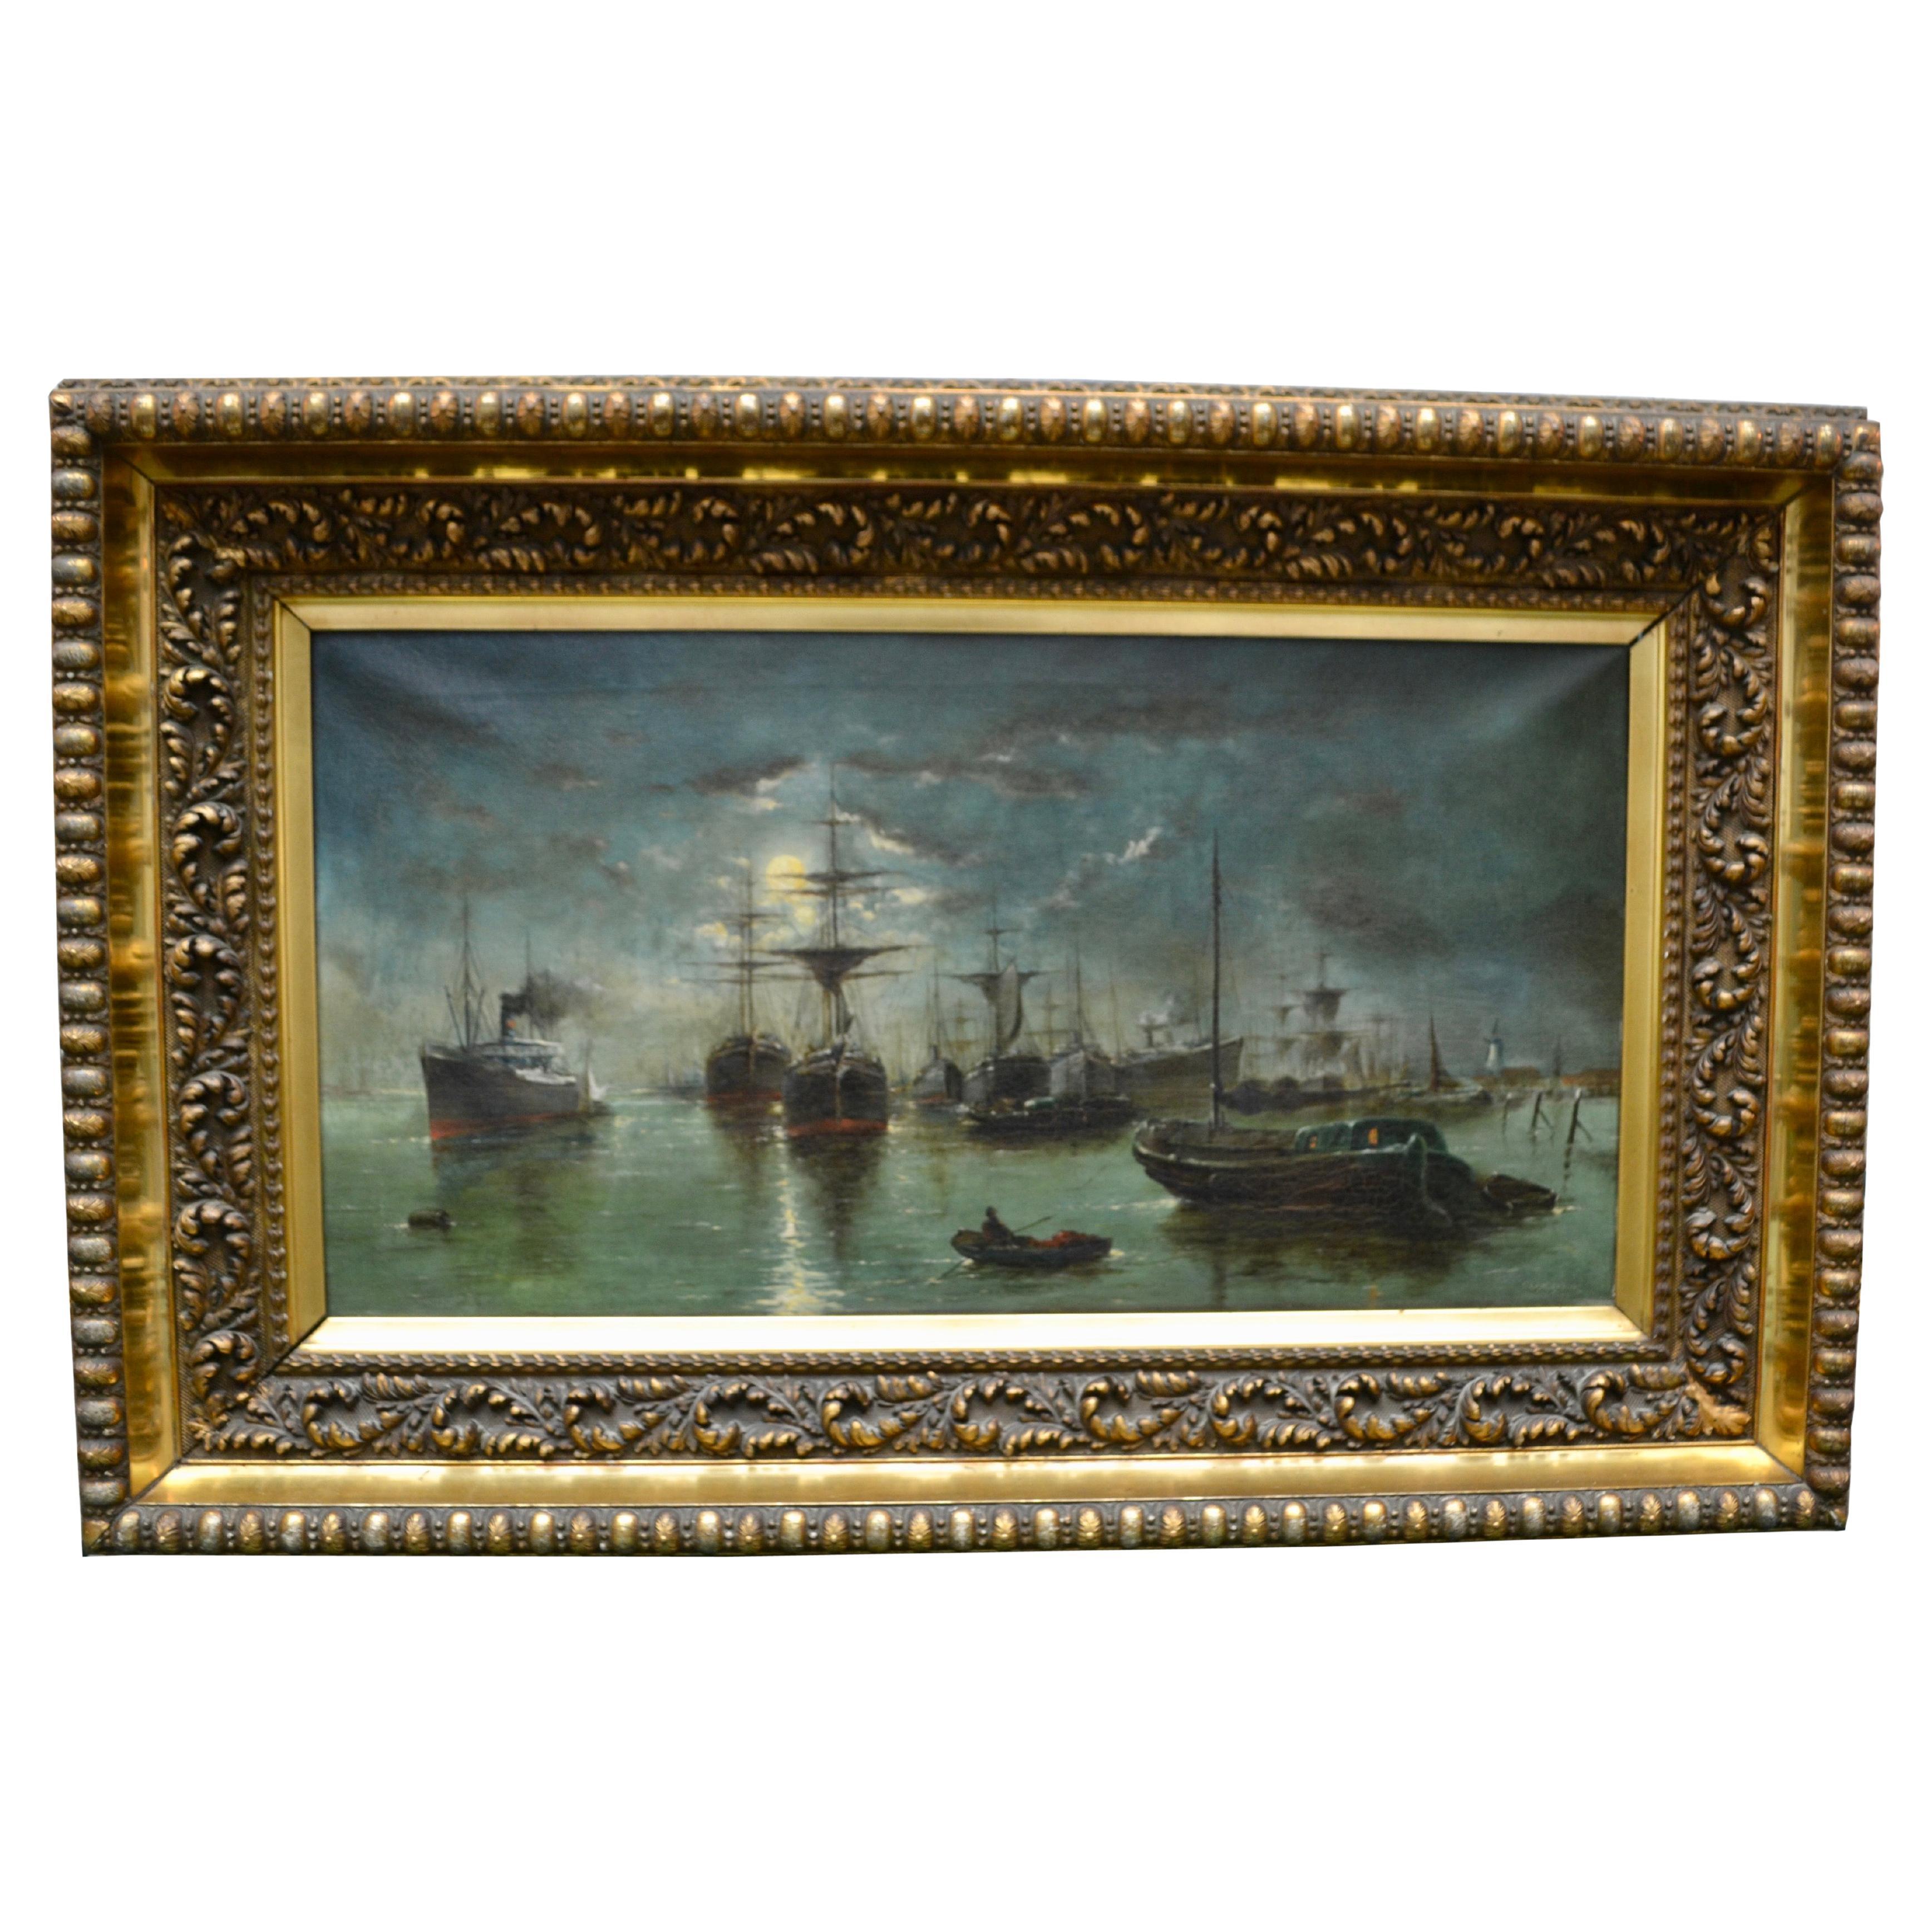 Classic Marine Painting Signed C. Langenbeck Dated 1906